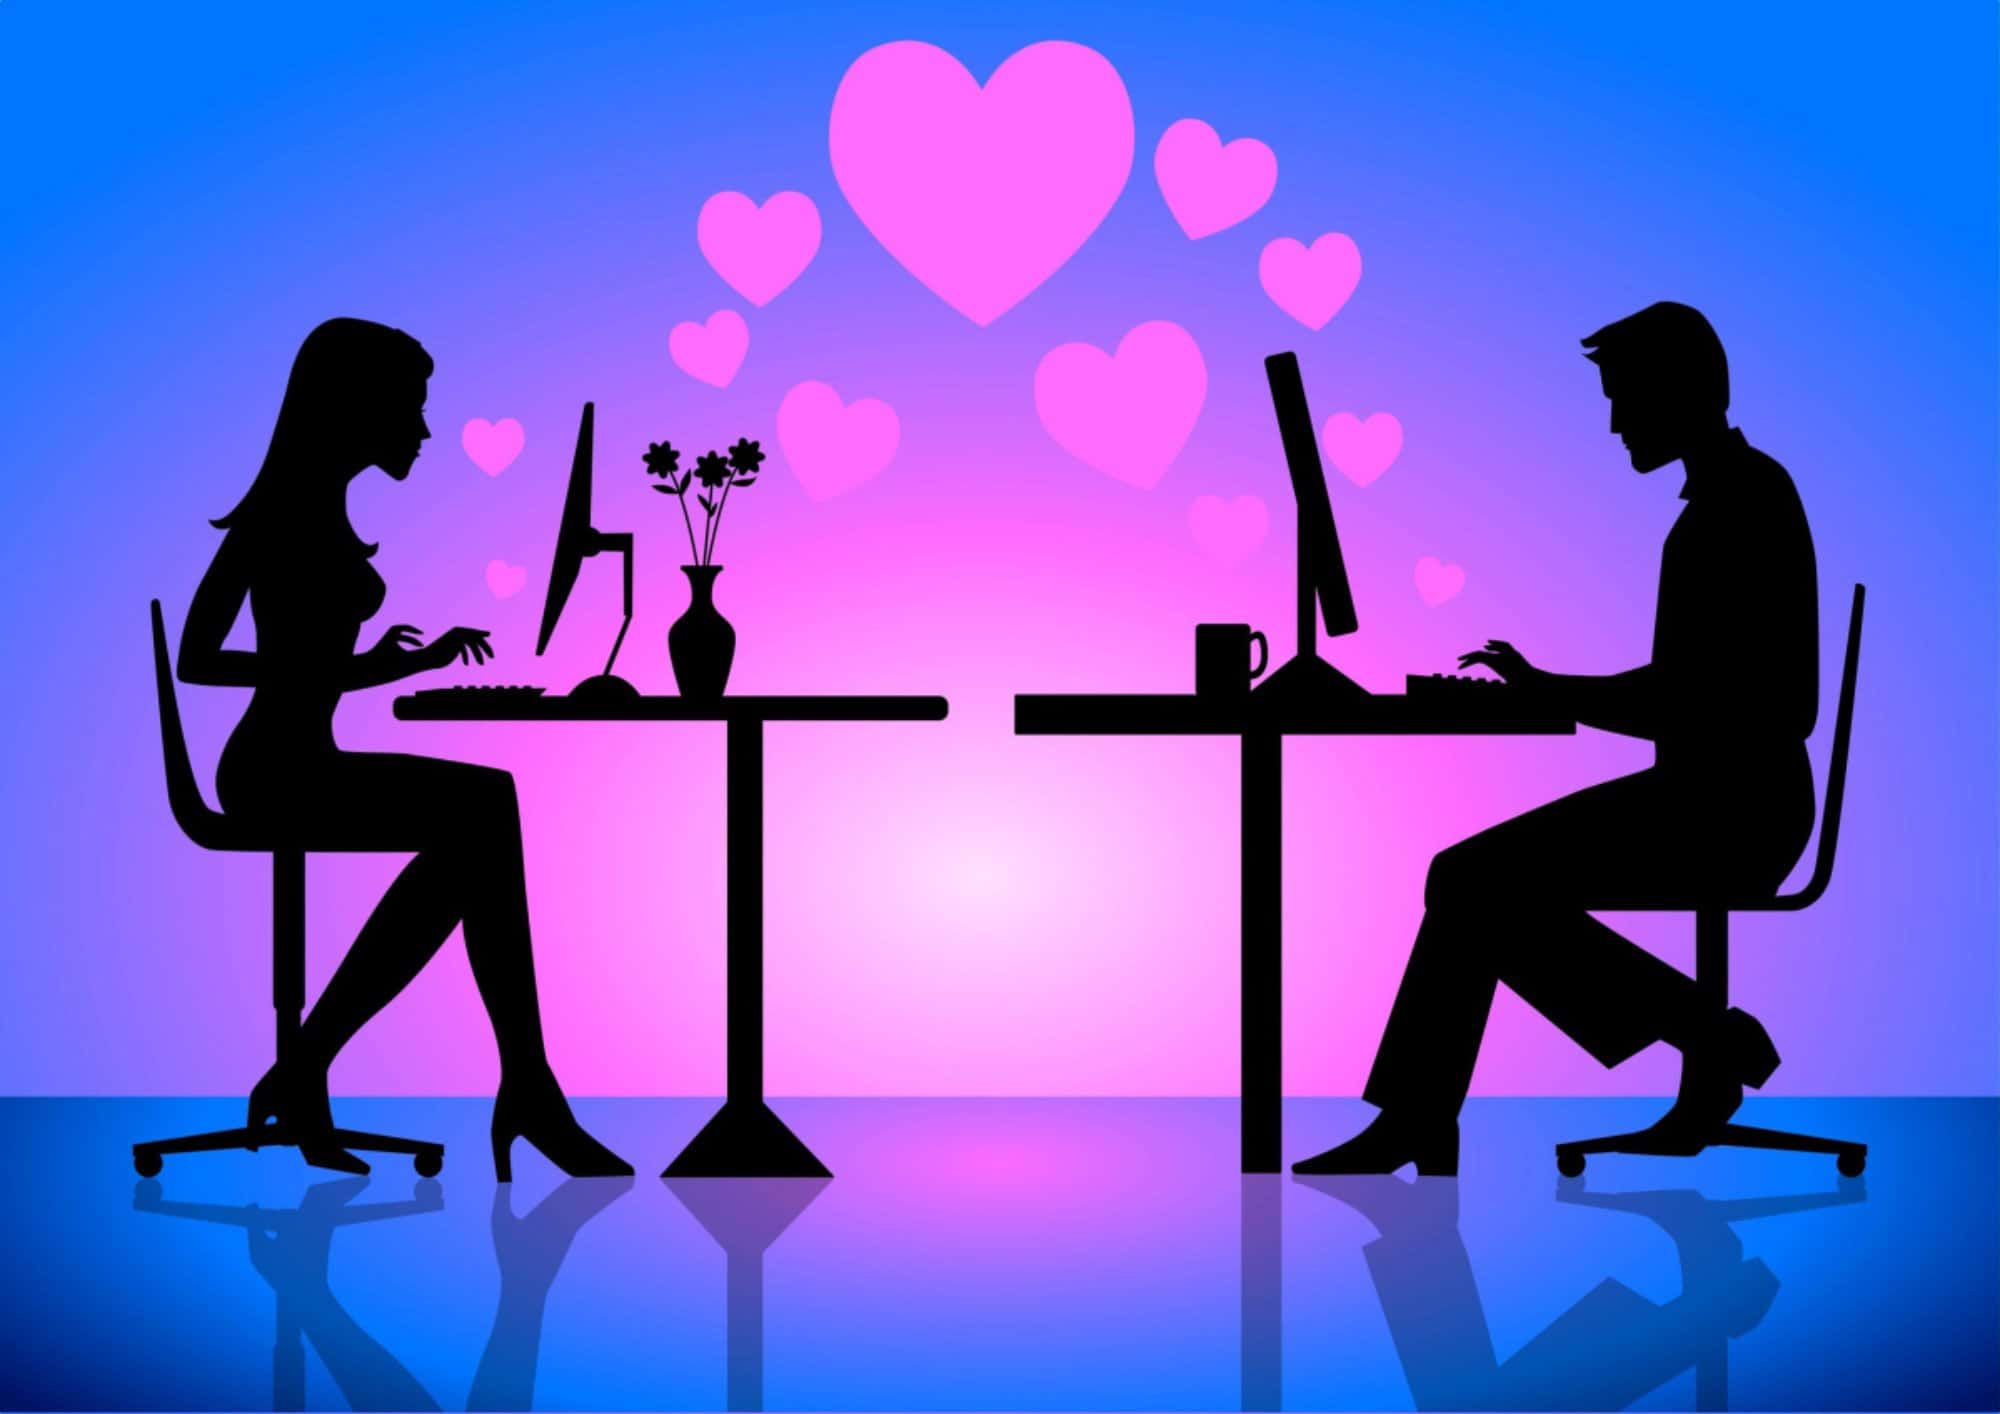 Fun facts about dating sites